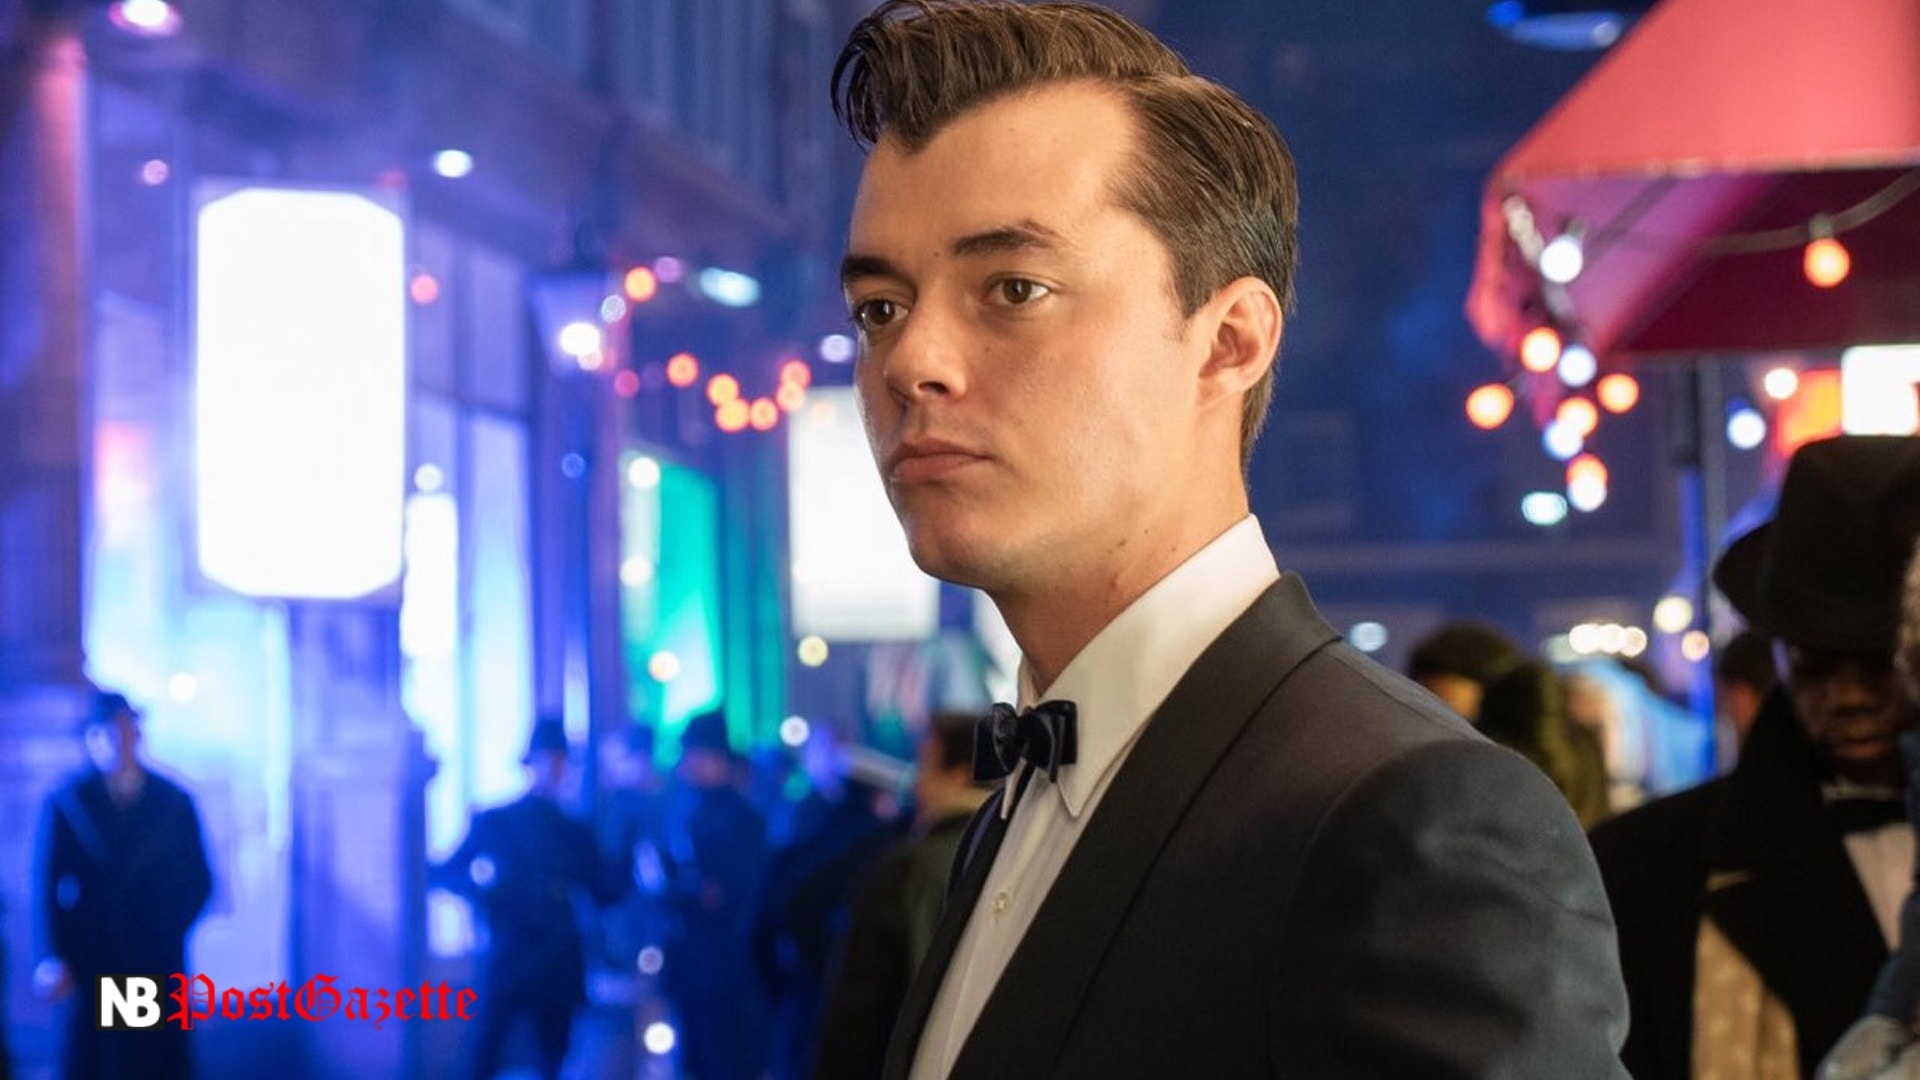 Pennyworth Release Date, Trailer, Cast, Filming And Many More Details!